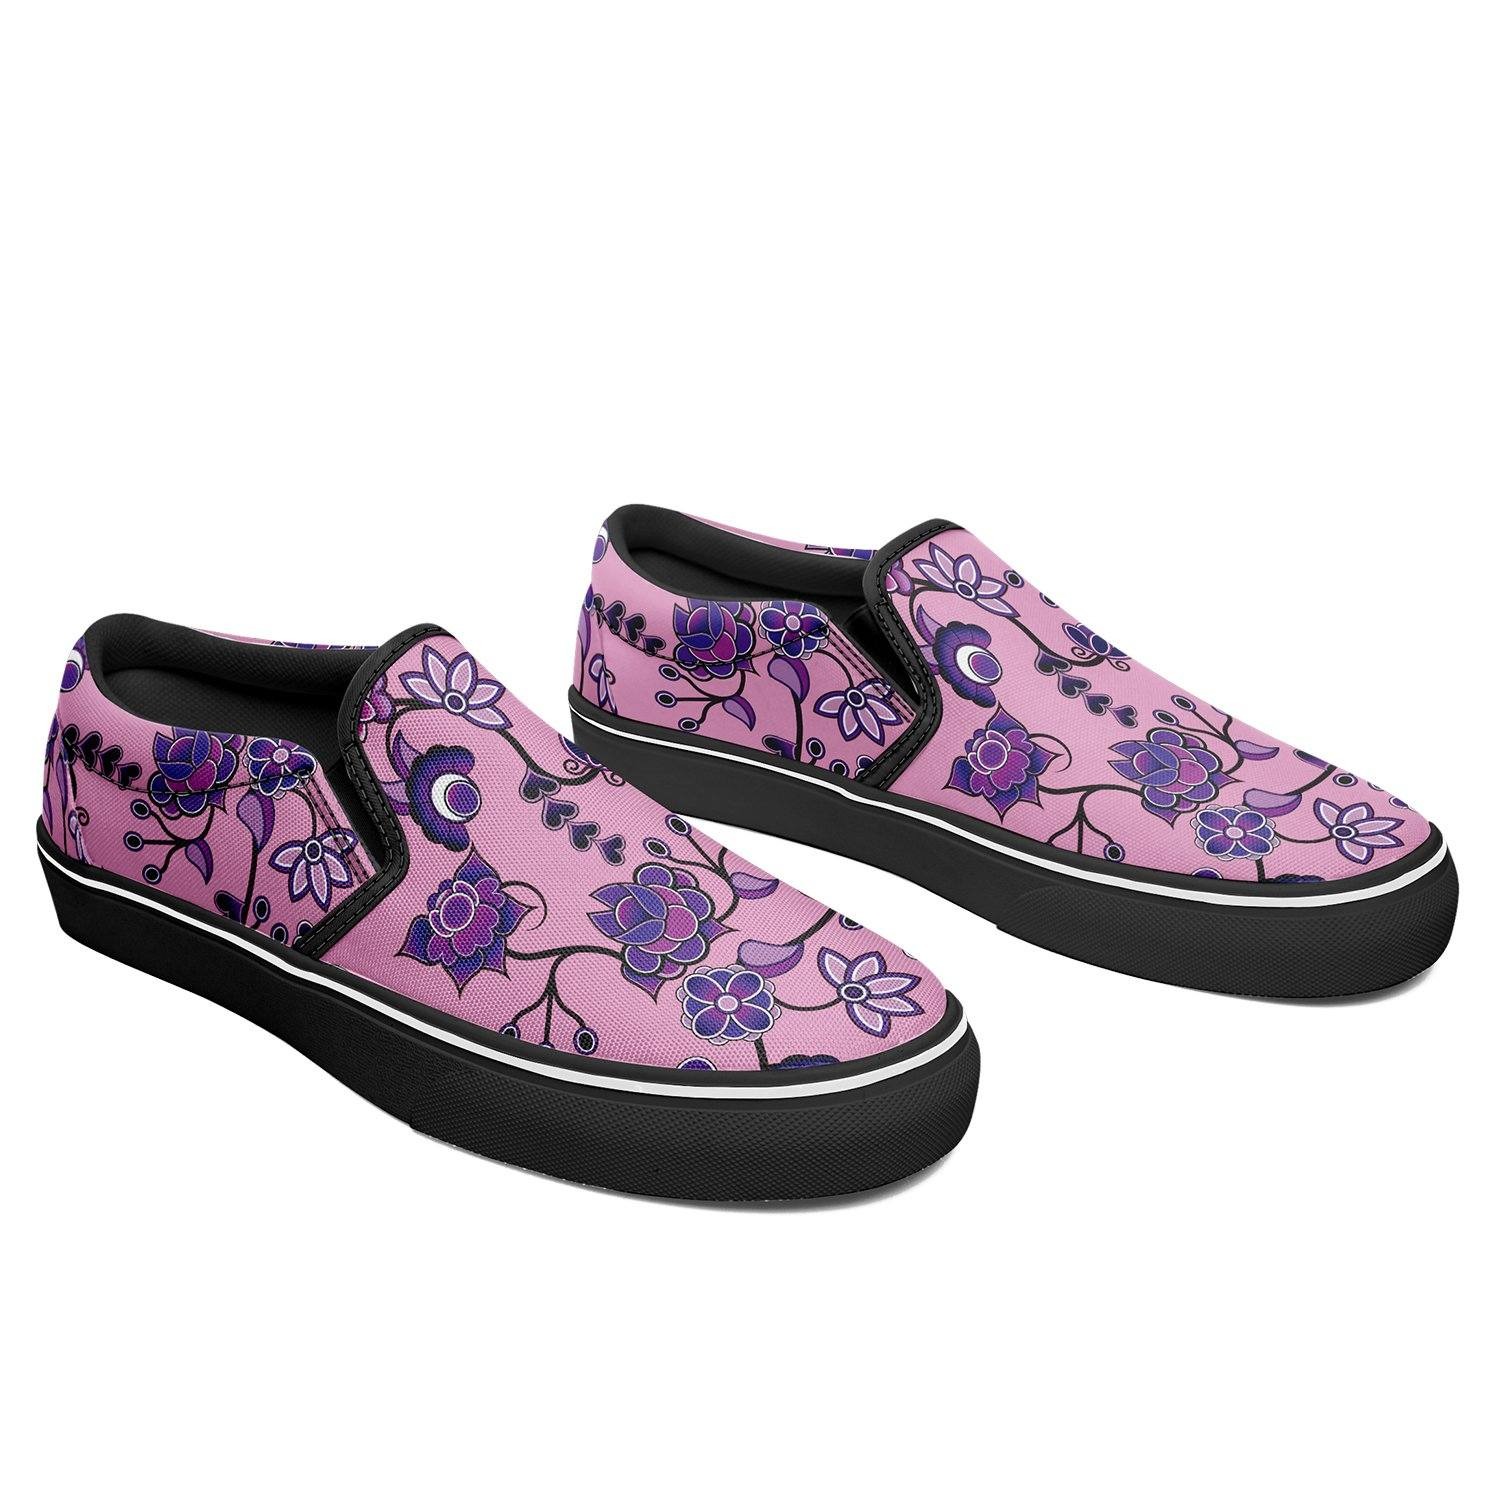 Purple Floral Amour Otoyimm Canvas Slip On Shoes